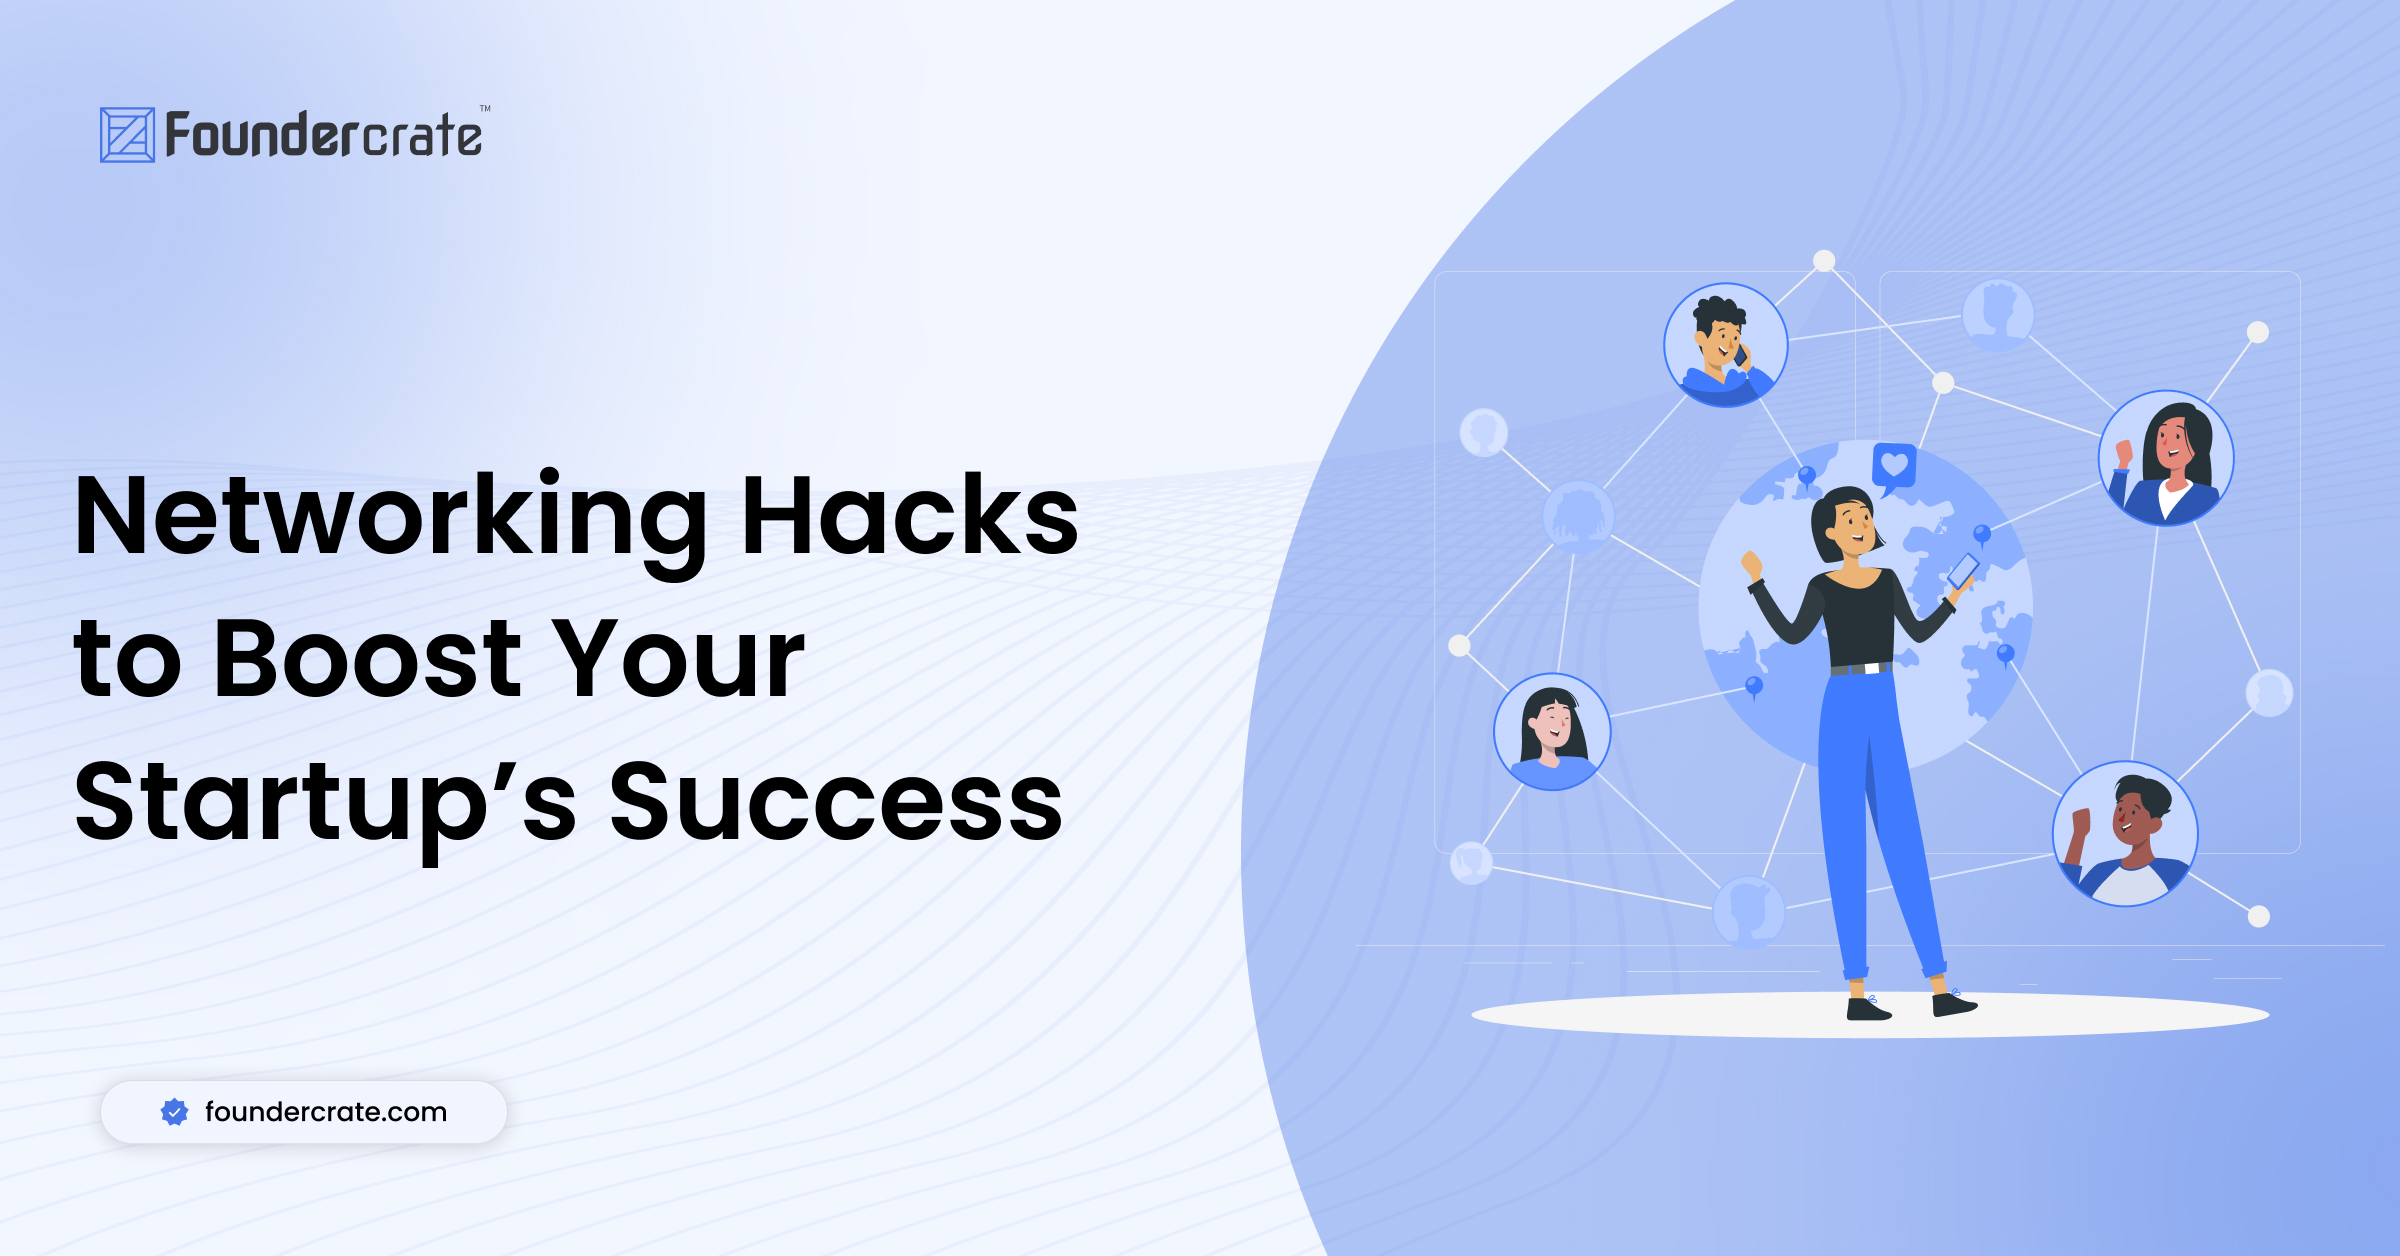 Proven Networking Hacks to Boost Your Startup’s Success